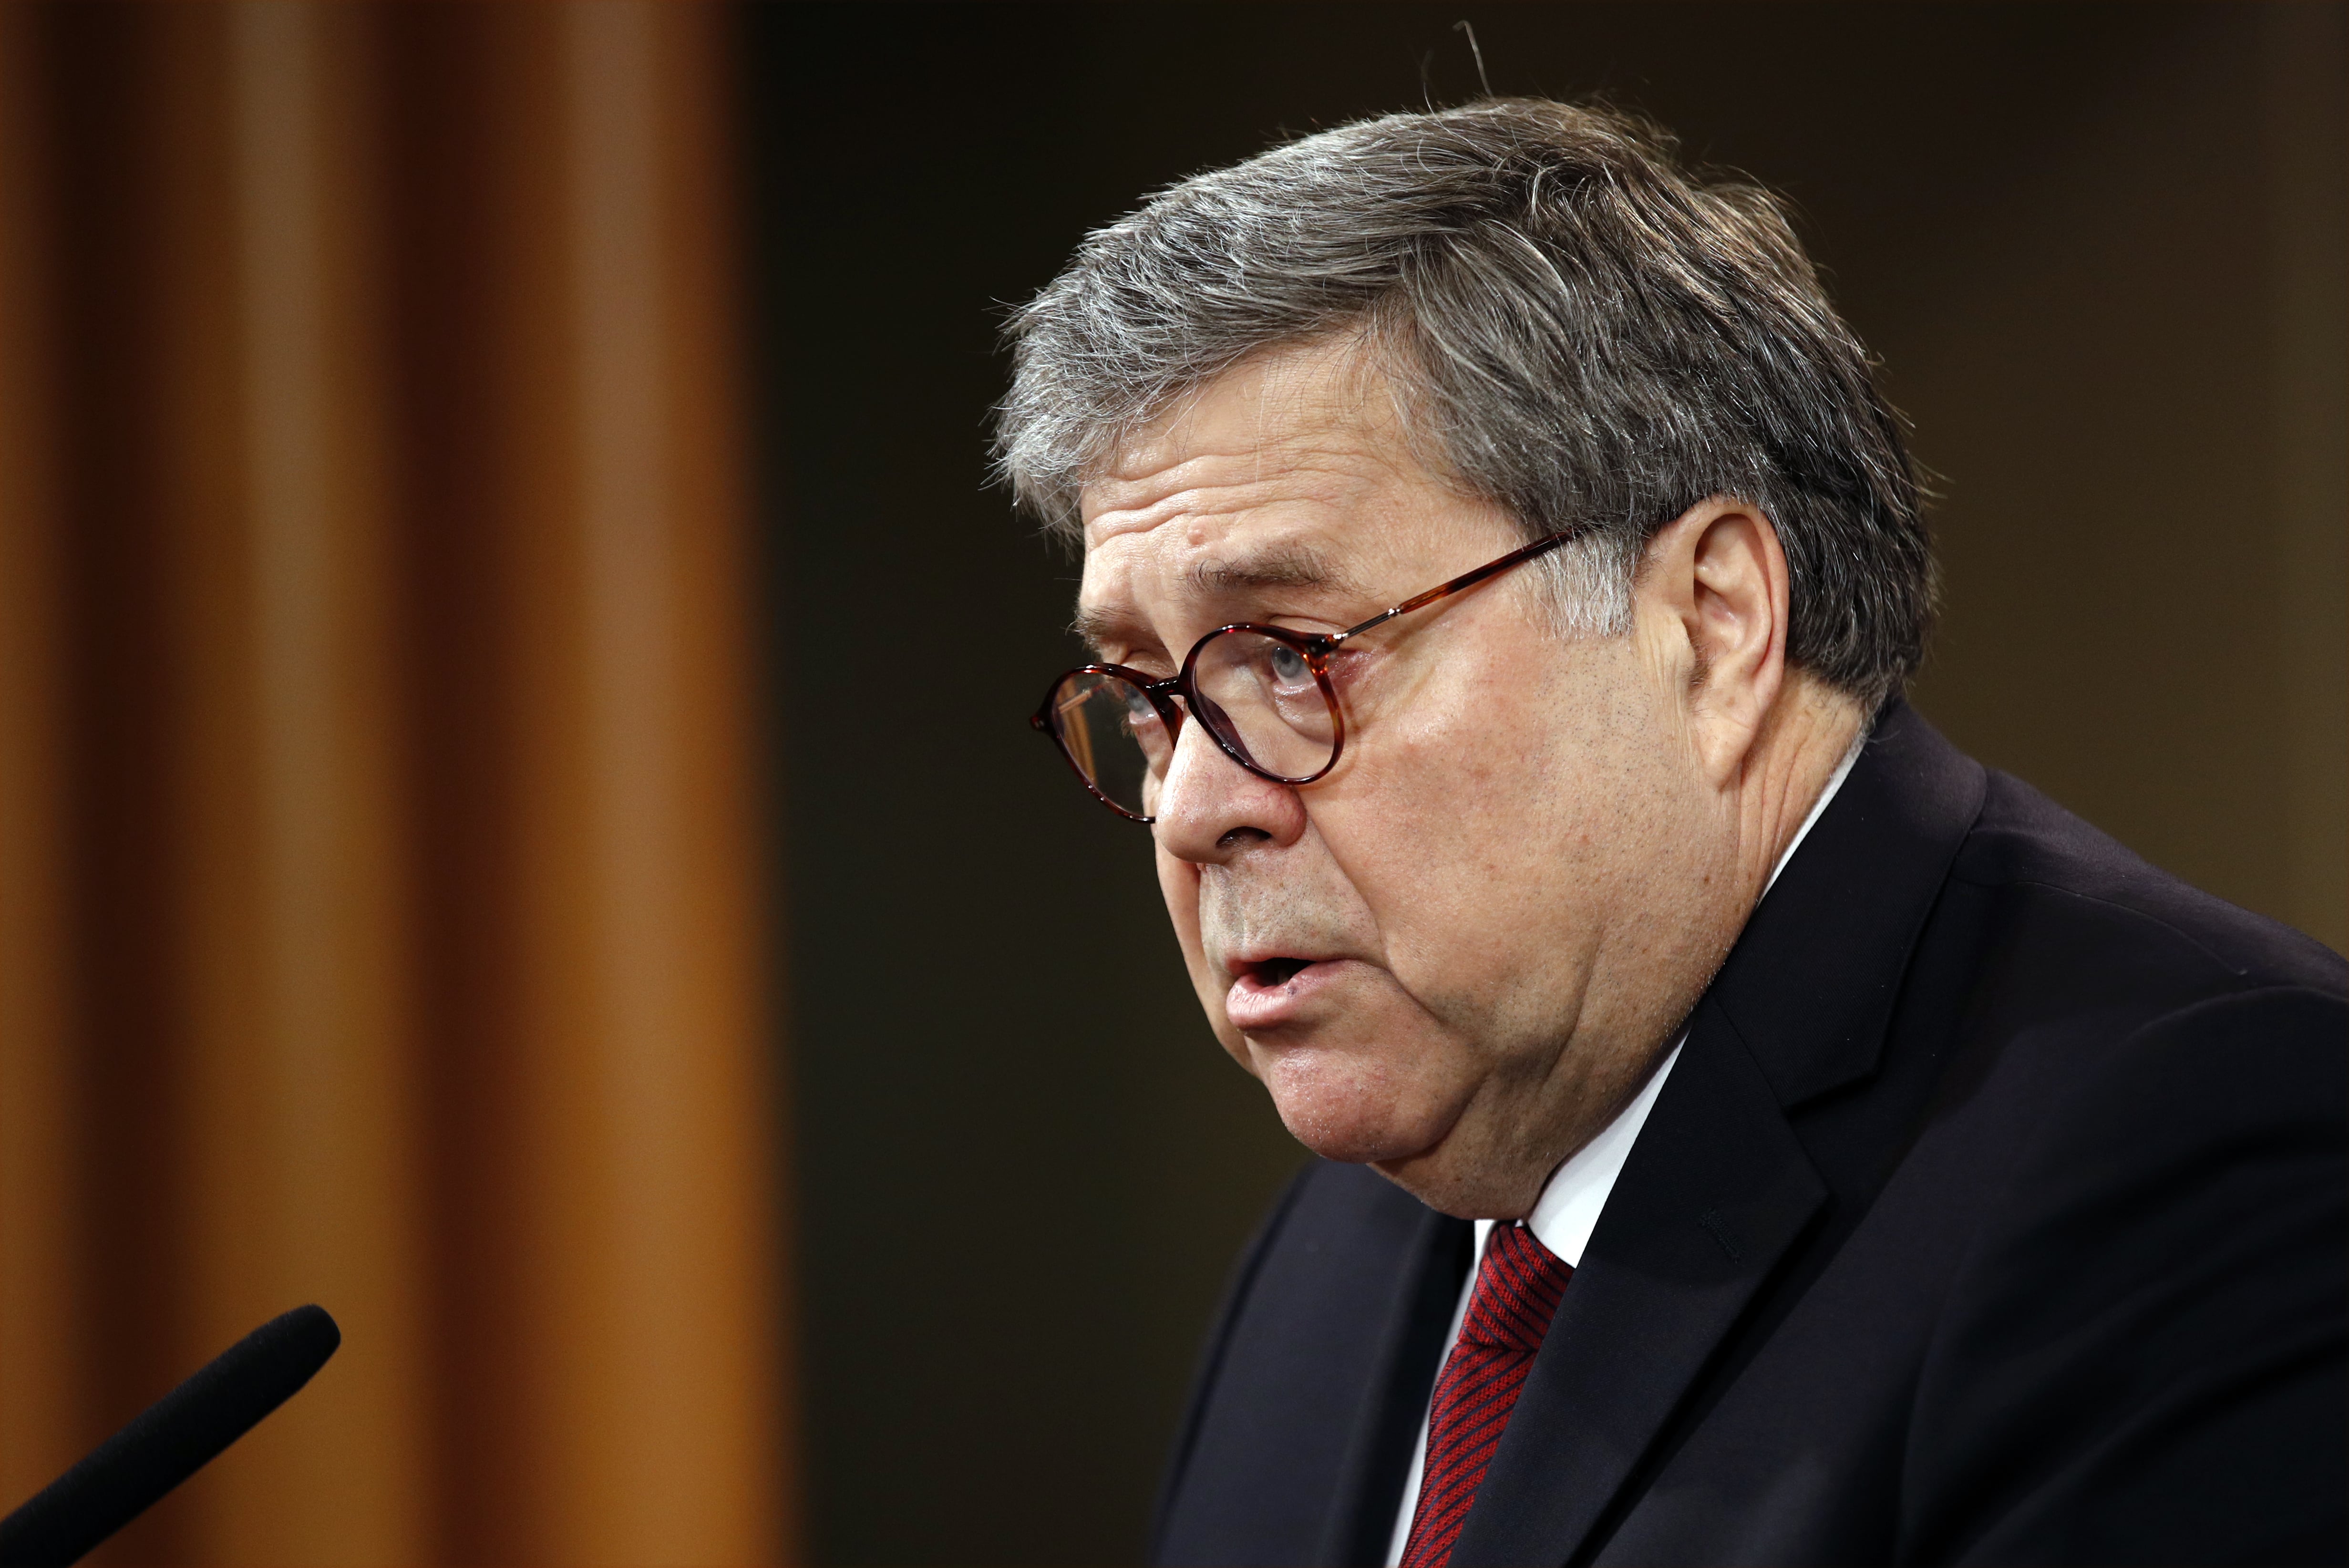 Attorney General William Barr speaks about the release of a redacted version of special counsel Robert Mueller's report during a news conference, Thursday, April 18, 2019, at the Department of Justice in Washington.